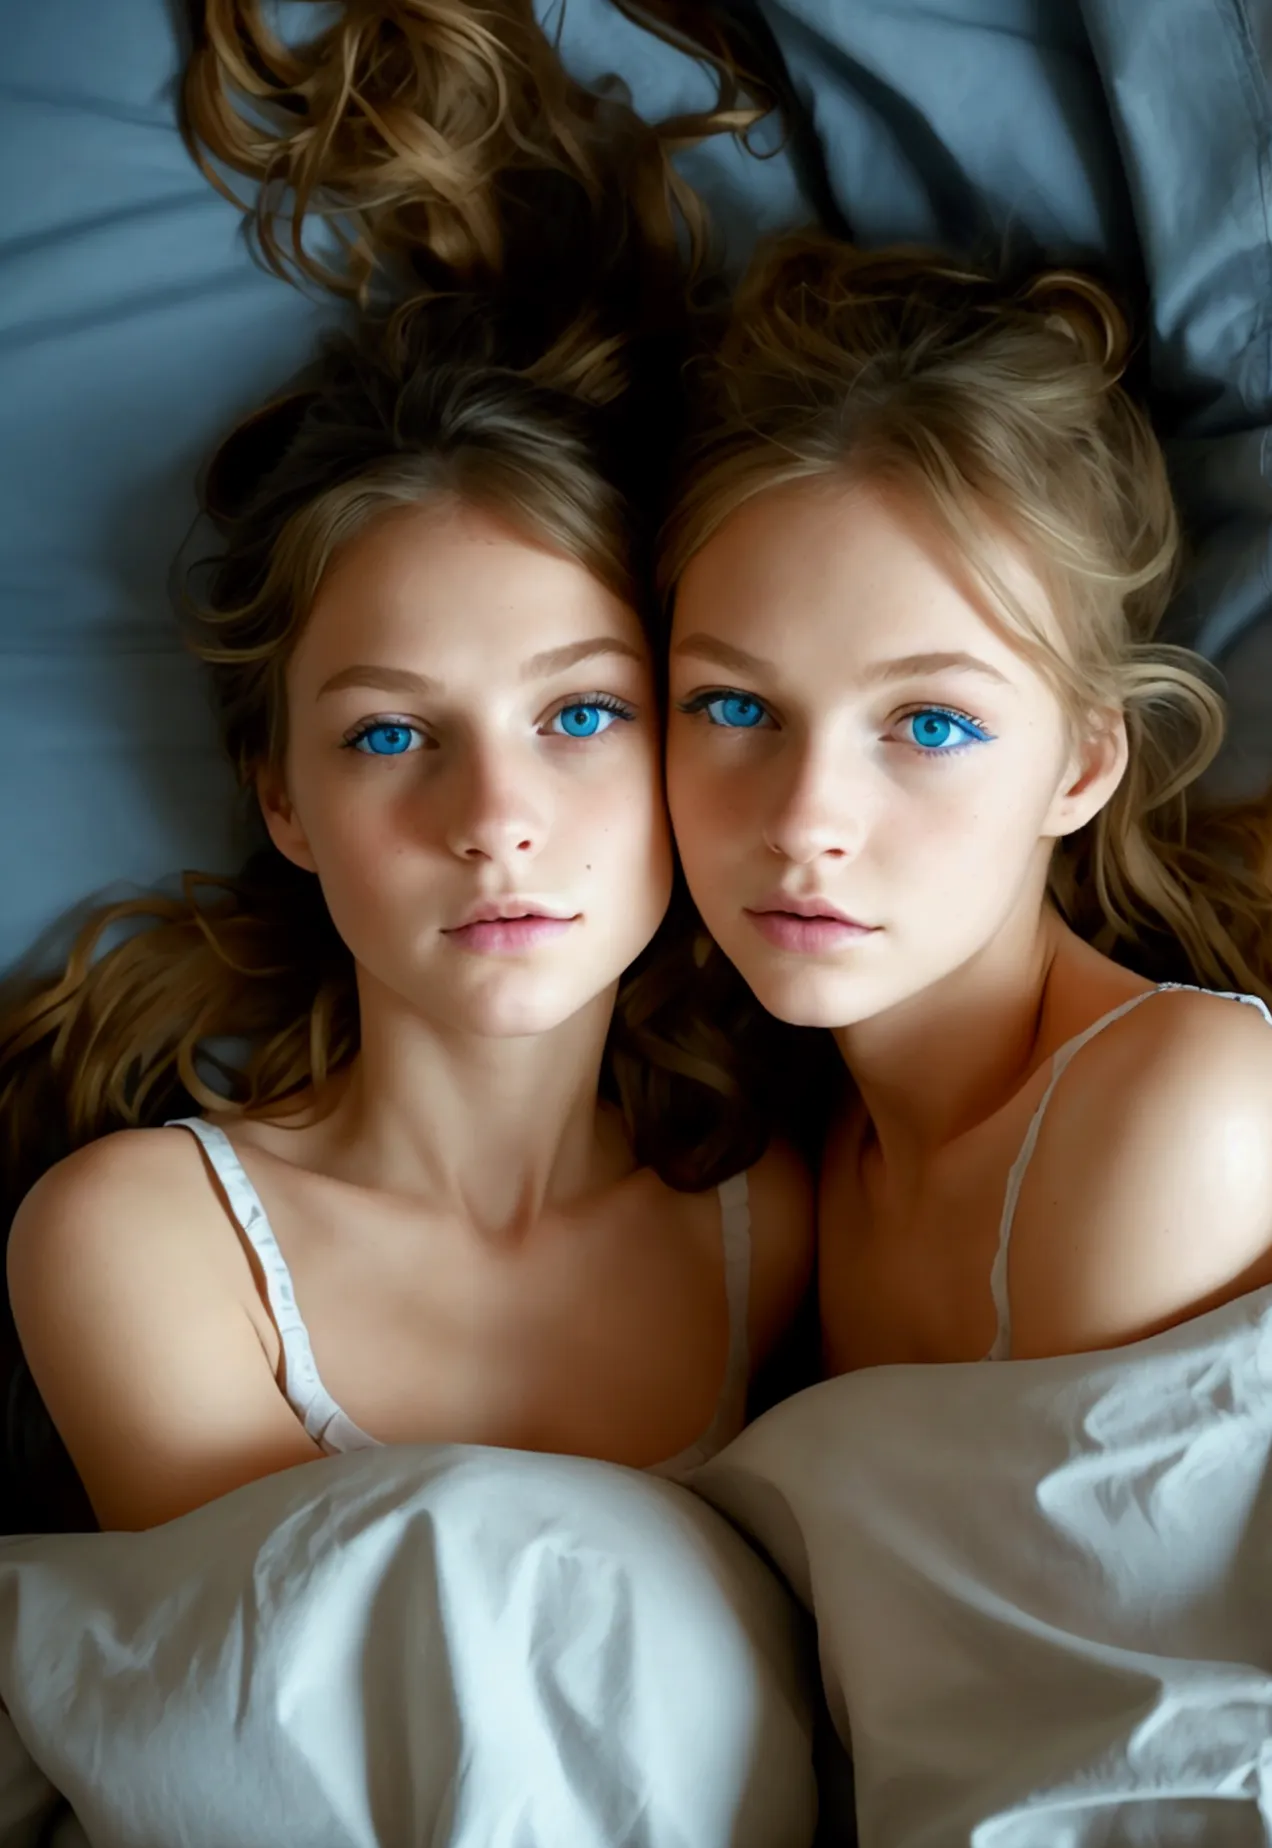 skinny, marked ribs, two young girls lying on a bed naked spread legs , long boots, blue eyes, collar, curly hair, ponytail,
